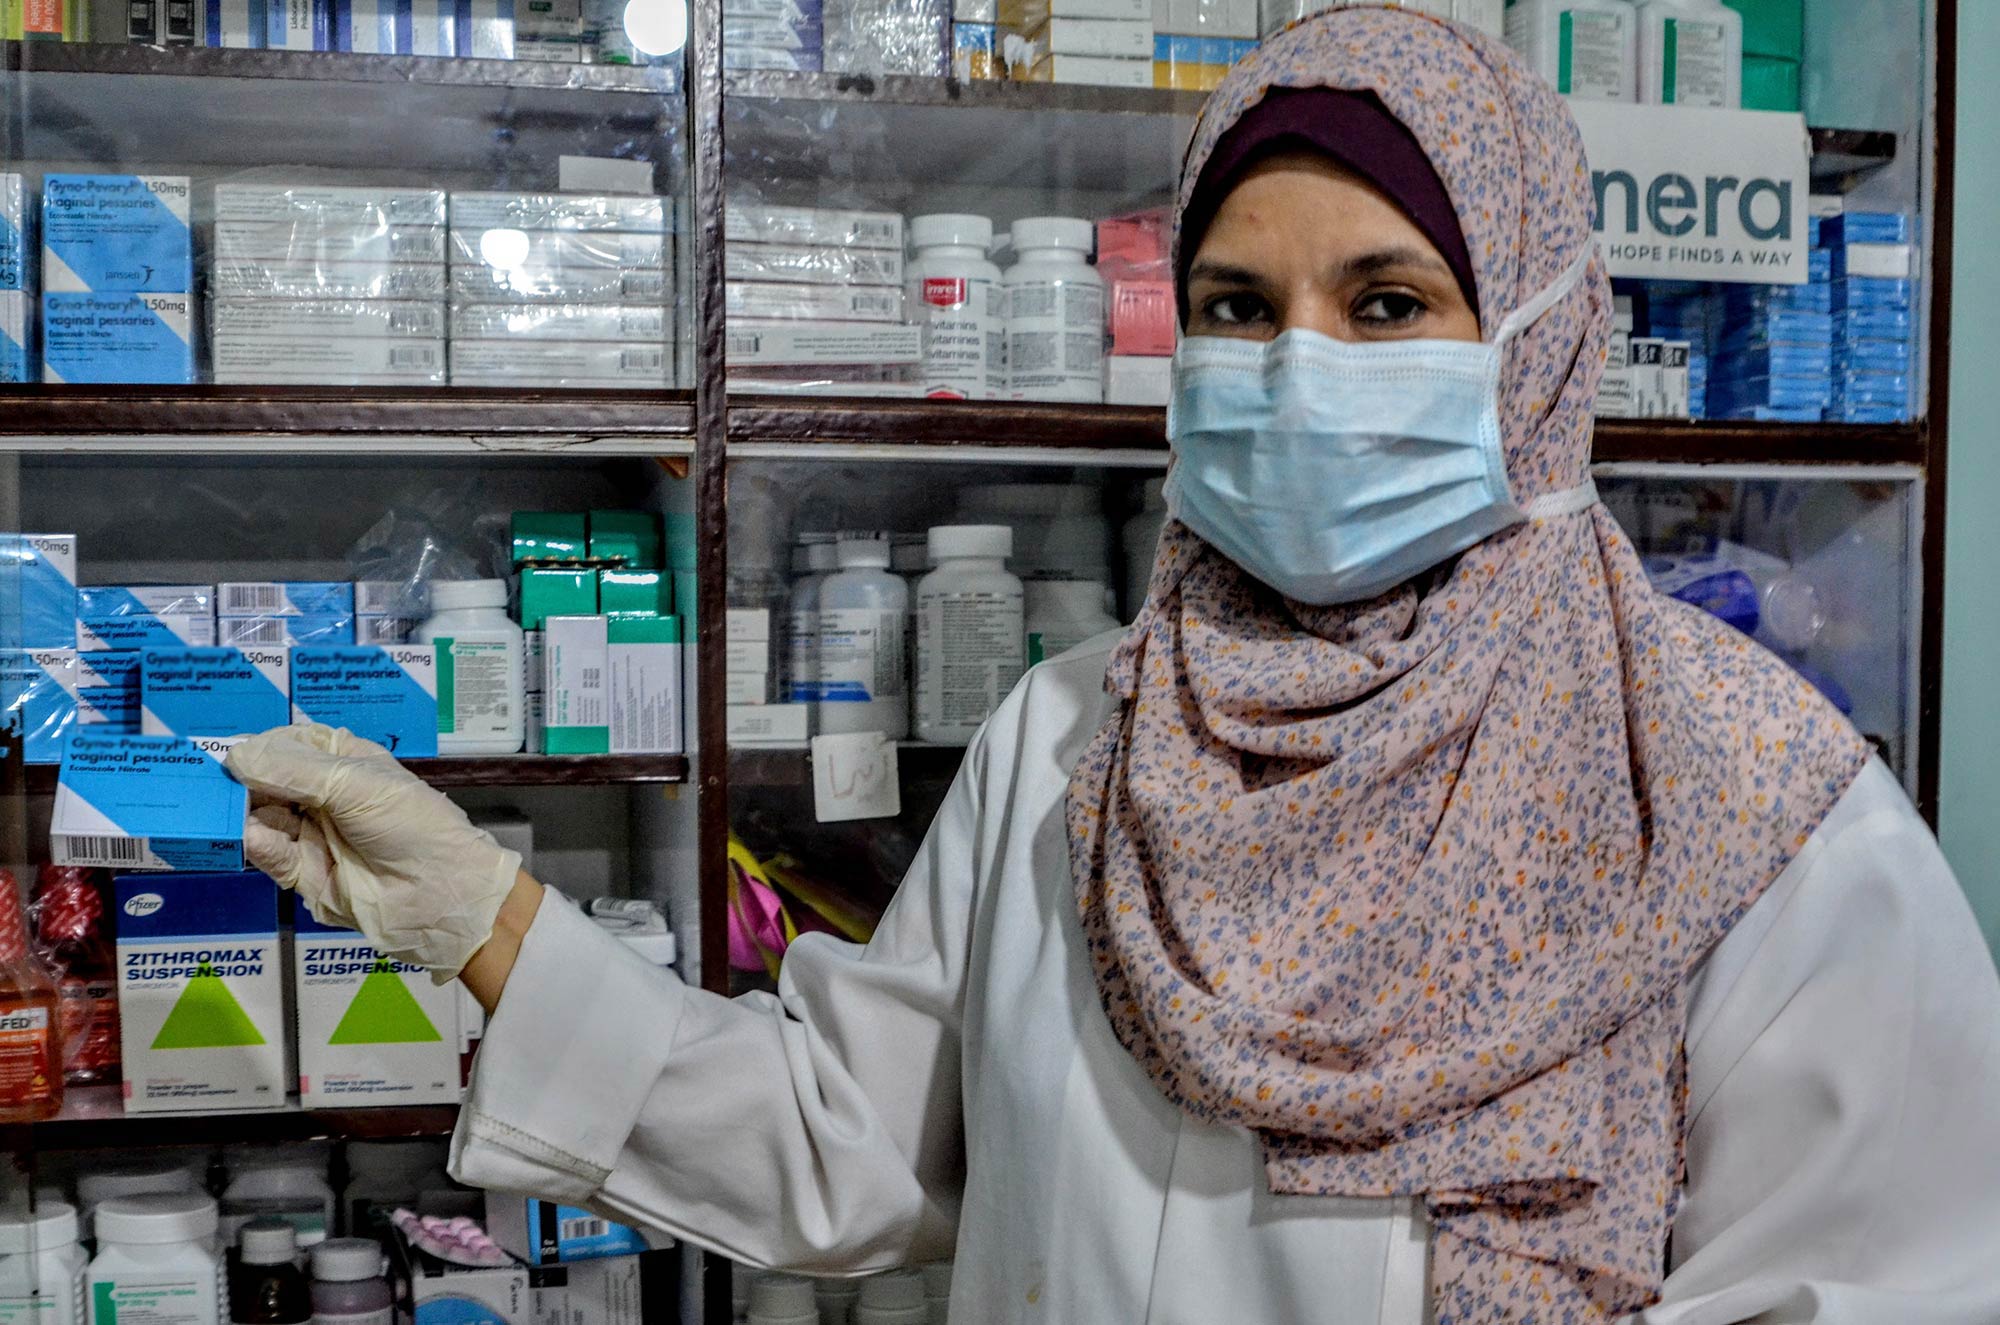 Marwa, a pharmacist at the clinic, sees dozens of patients in a typical day.